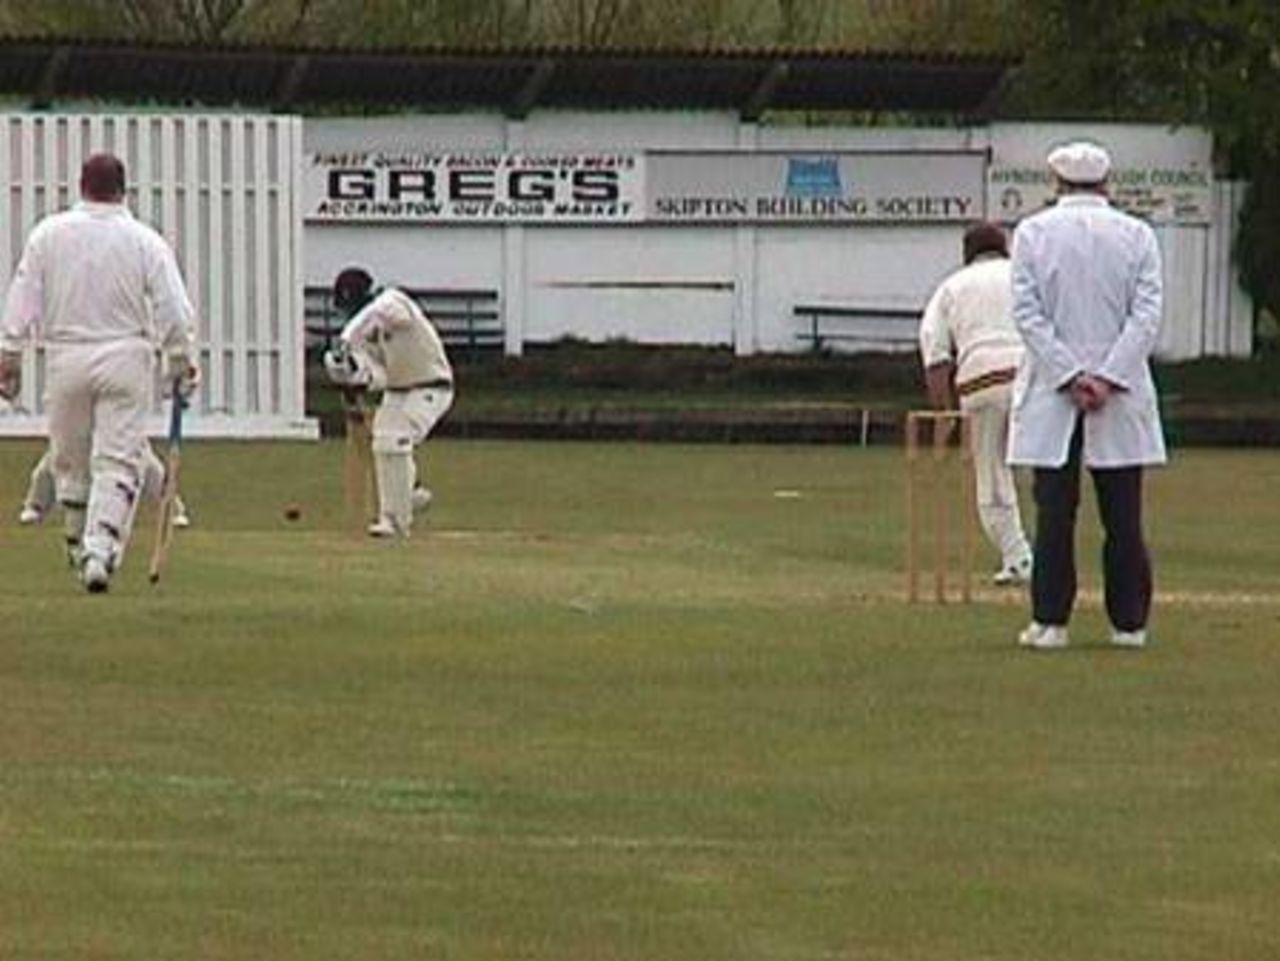 Lowerhouse professional Jon Kent in defensive mode early in his innings at Thorneyholme Road